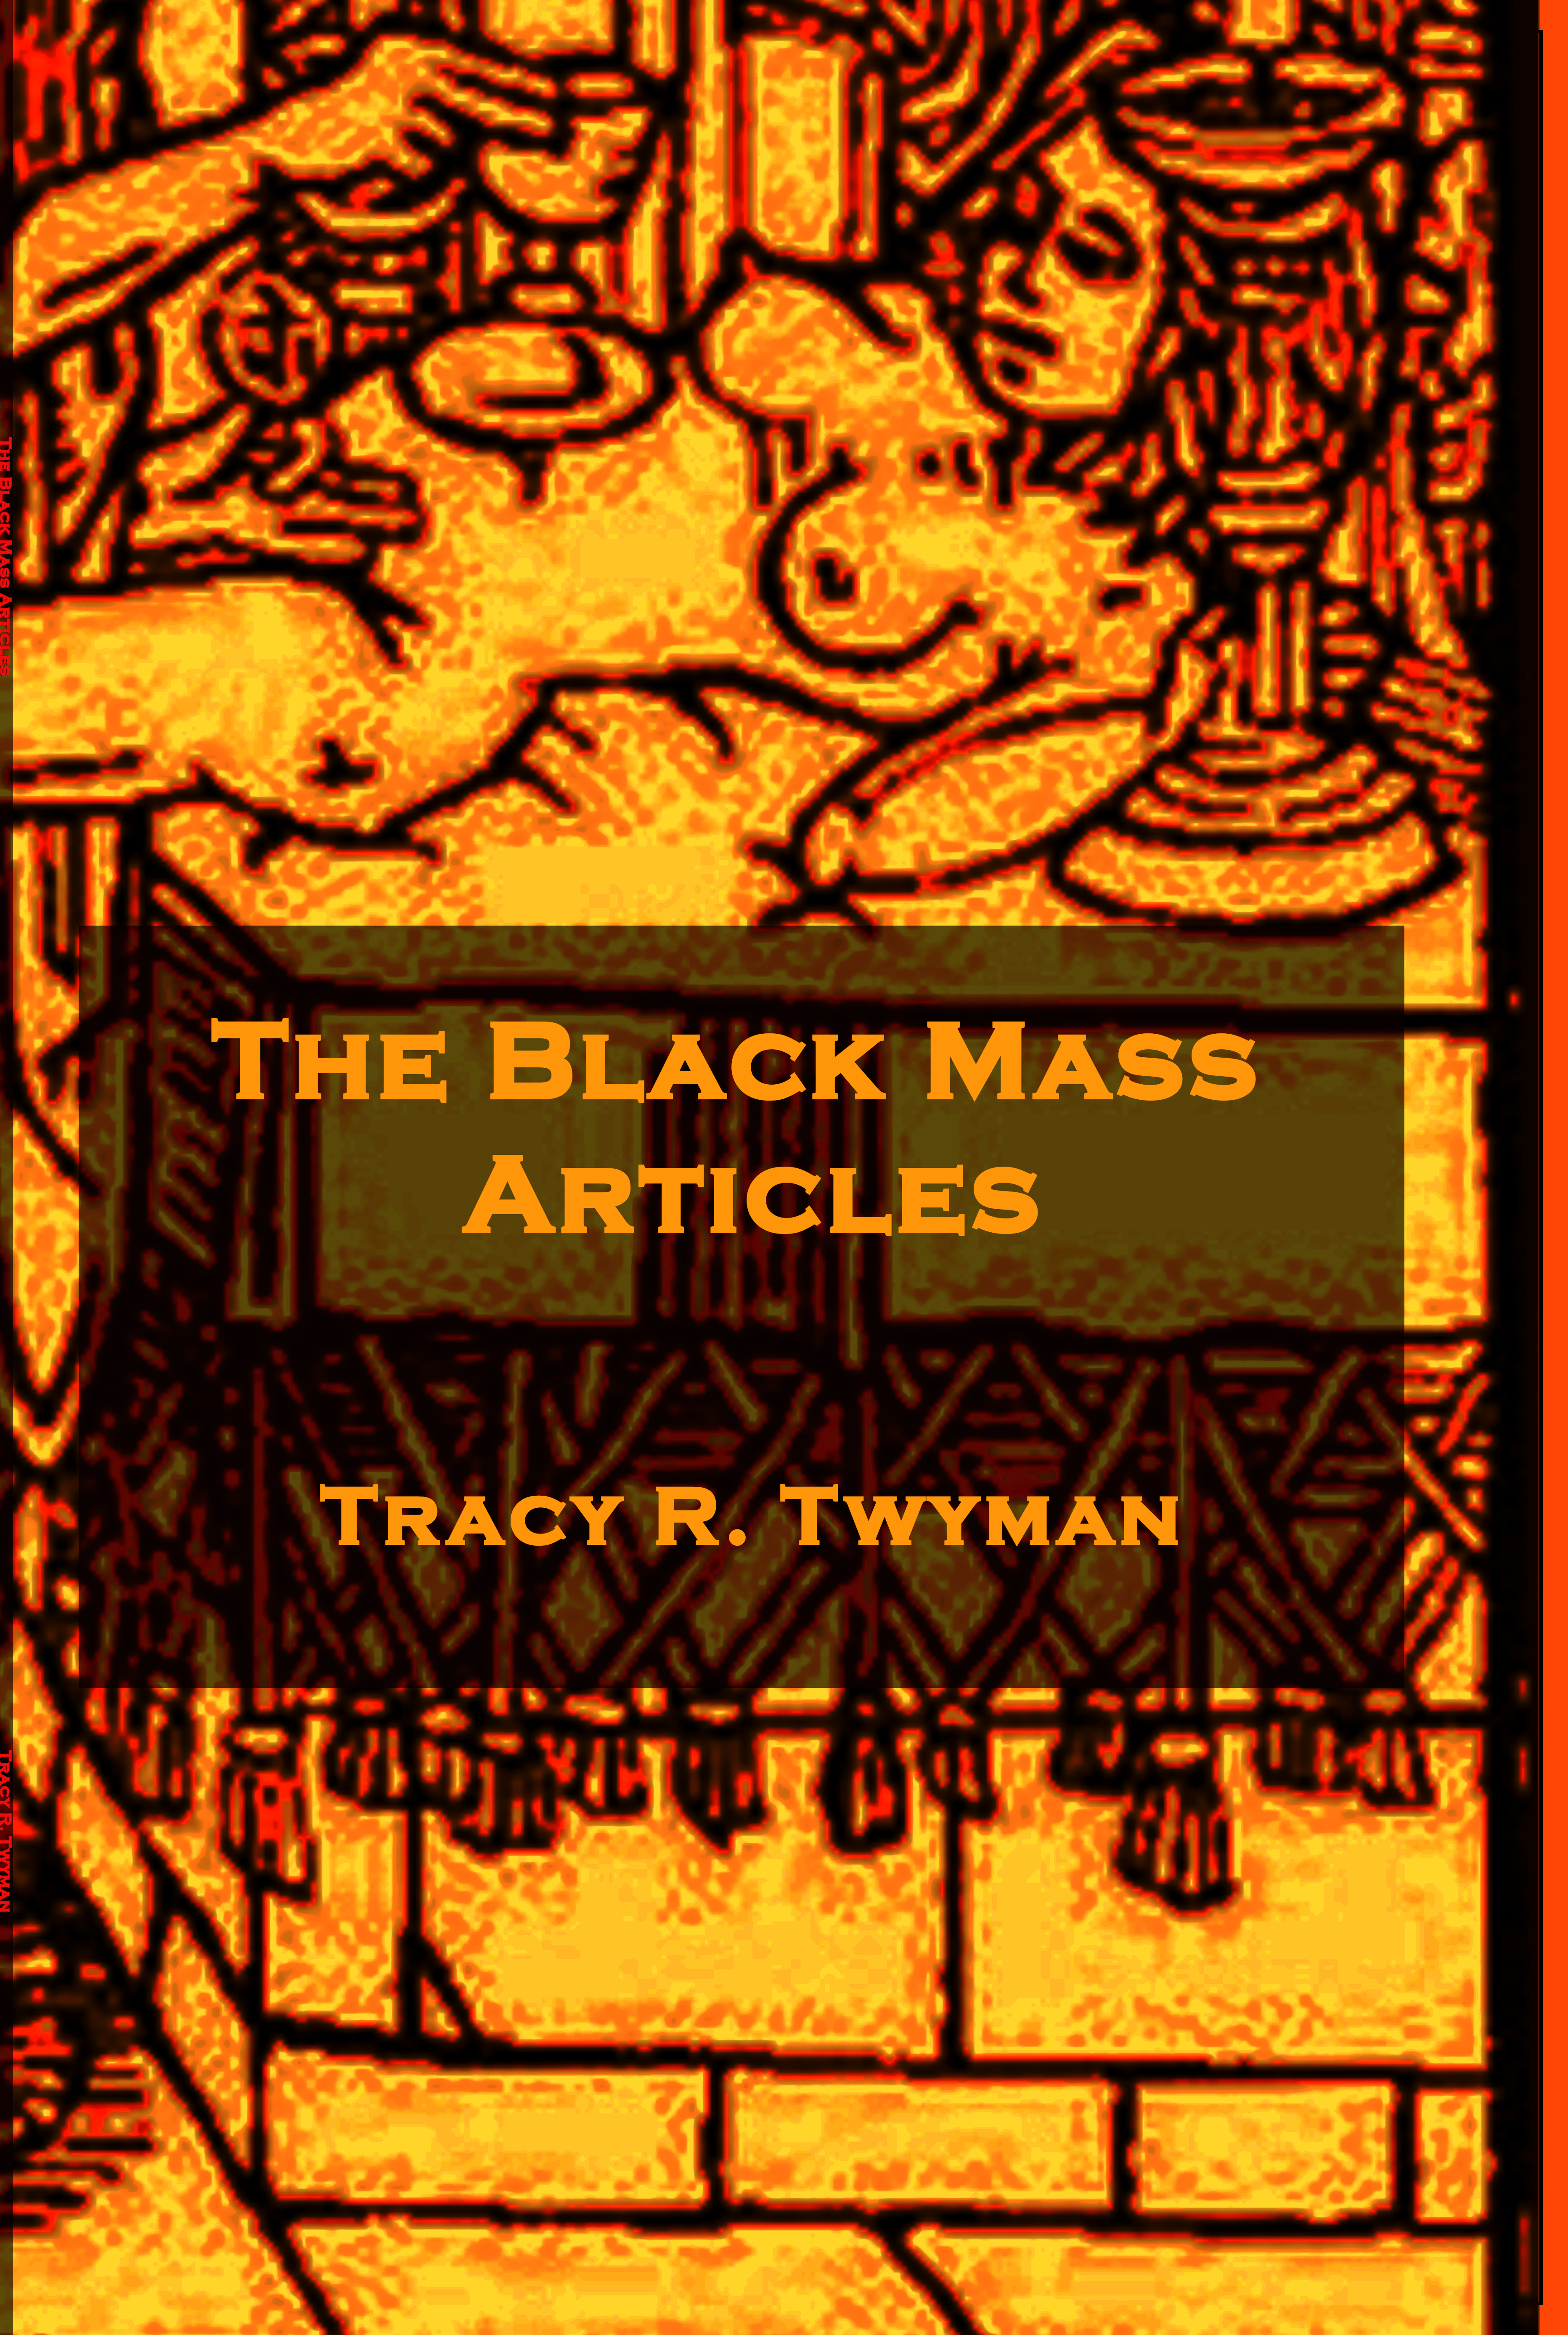 Book Cover Front: The Black Mass Articles by Tracy Twyman